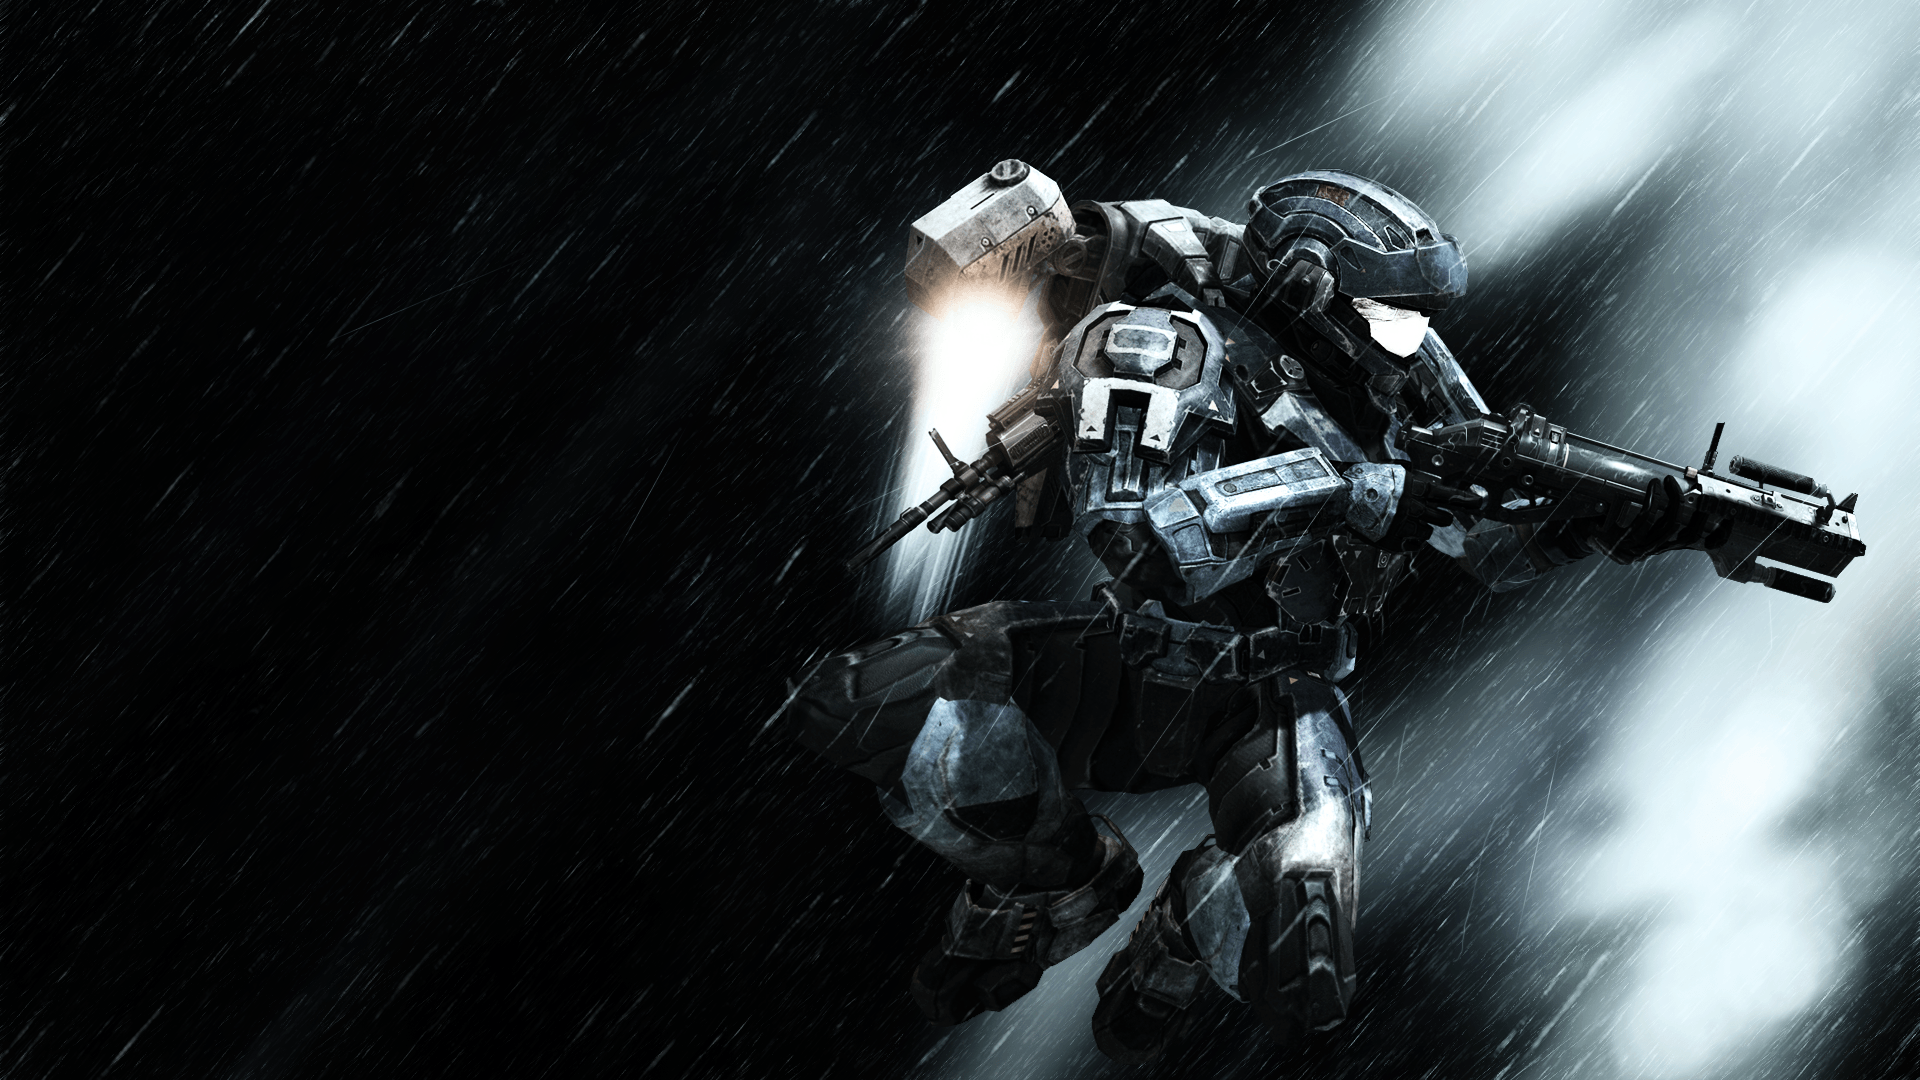 video games, guns, Halo, weapons, armor wallpaper